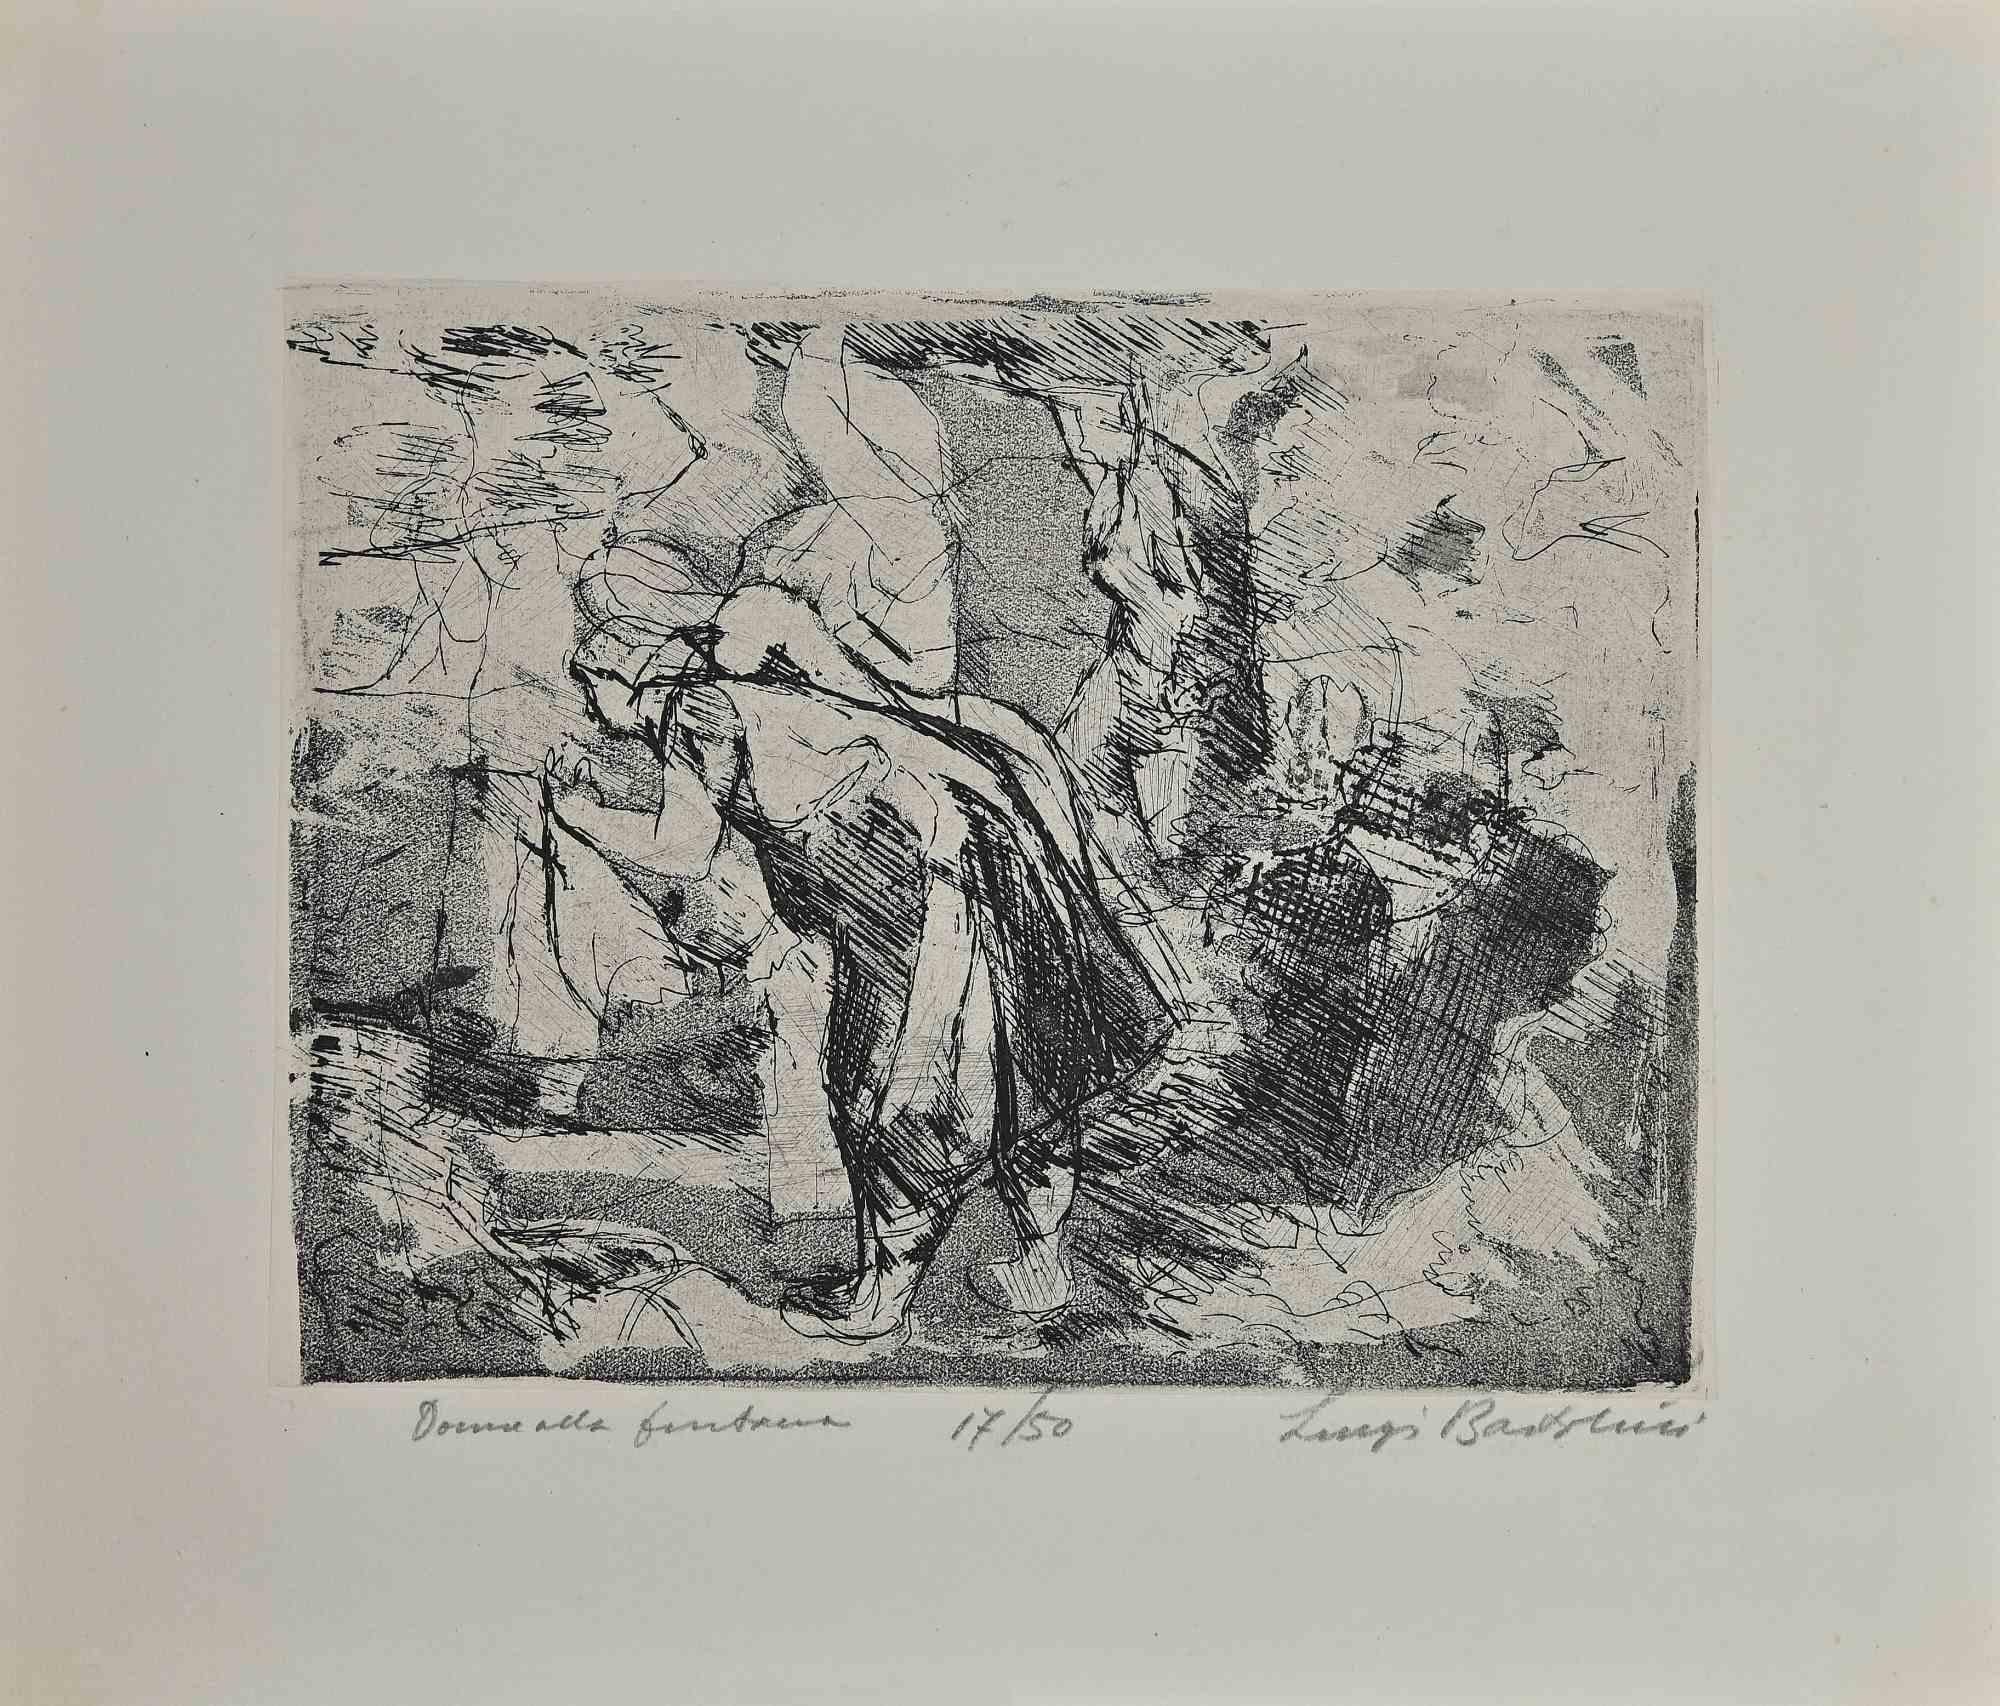 Women at the Fountain is an original artwork realized by the Italian artist Luigi Bartolini (1892-1963) in 1950.

Black and white Etching.

Hand-signed, titled and numbered ( 17/50 ) in pencil on the lower margin. Edition of 50